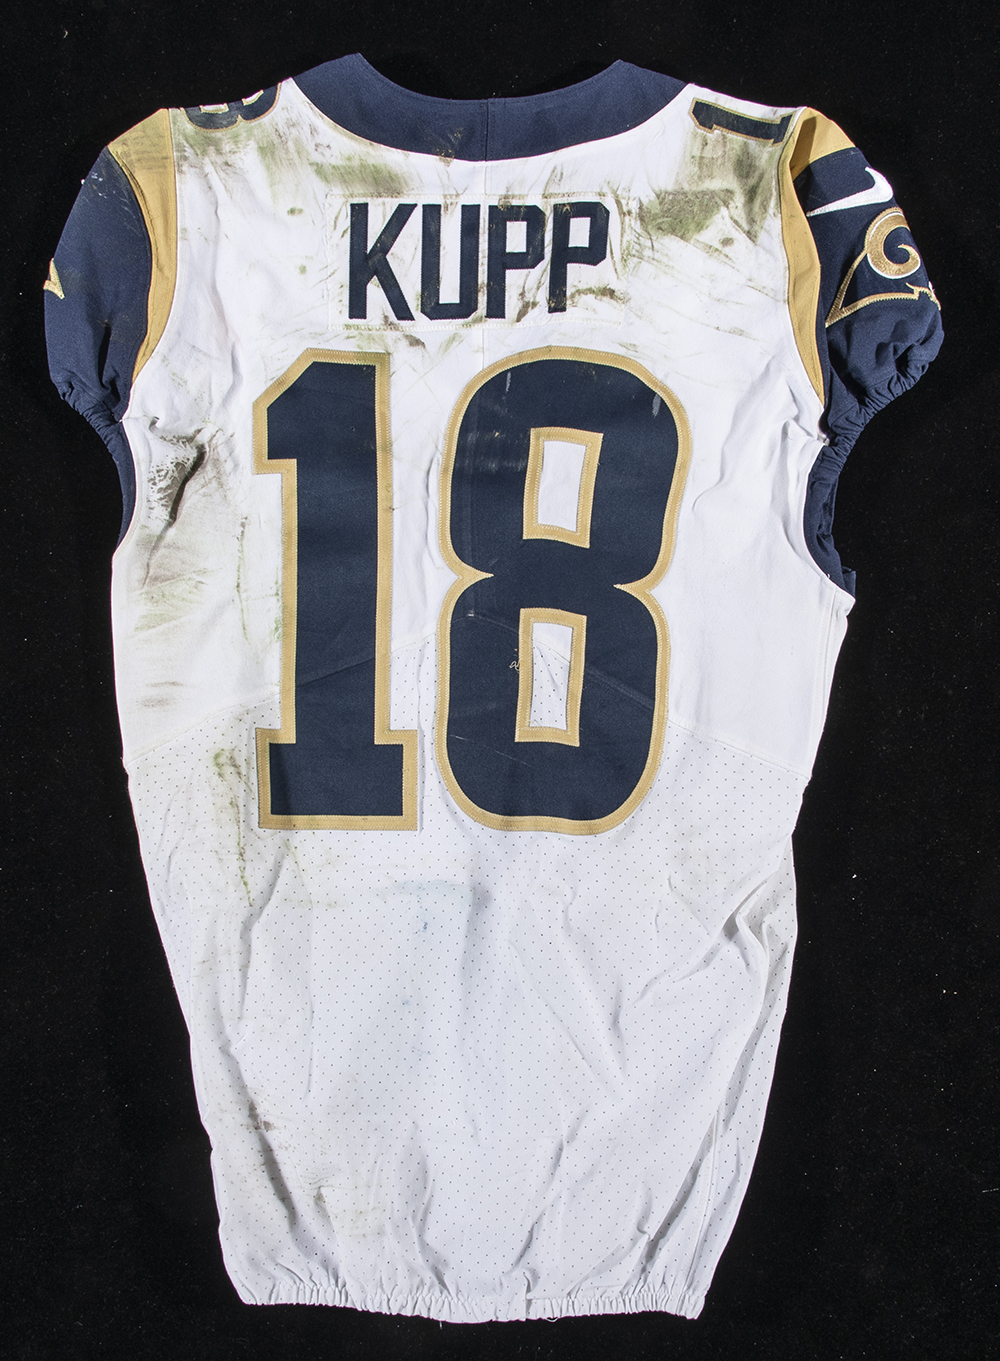 Cooper Kupp Jersey from Sophomore Season at Eastern Washington Coming to  Auction